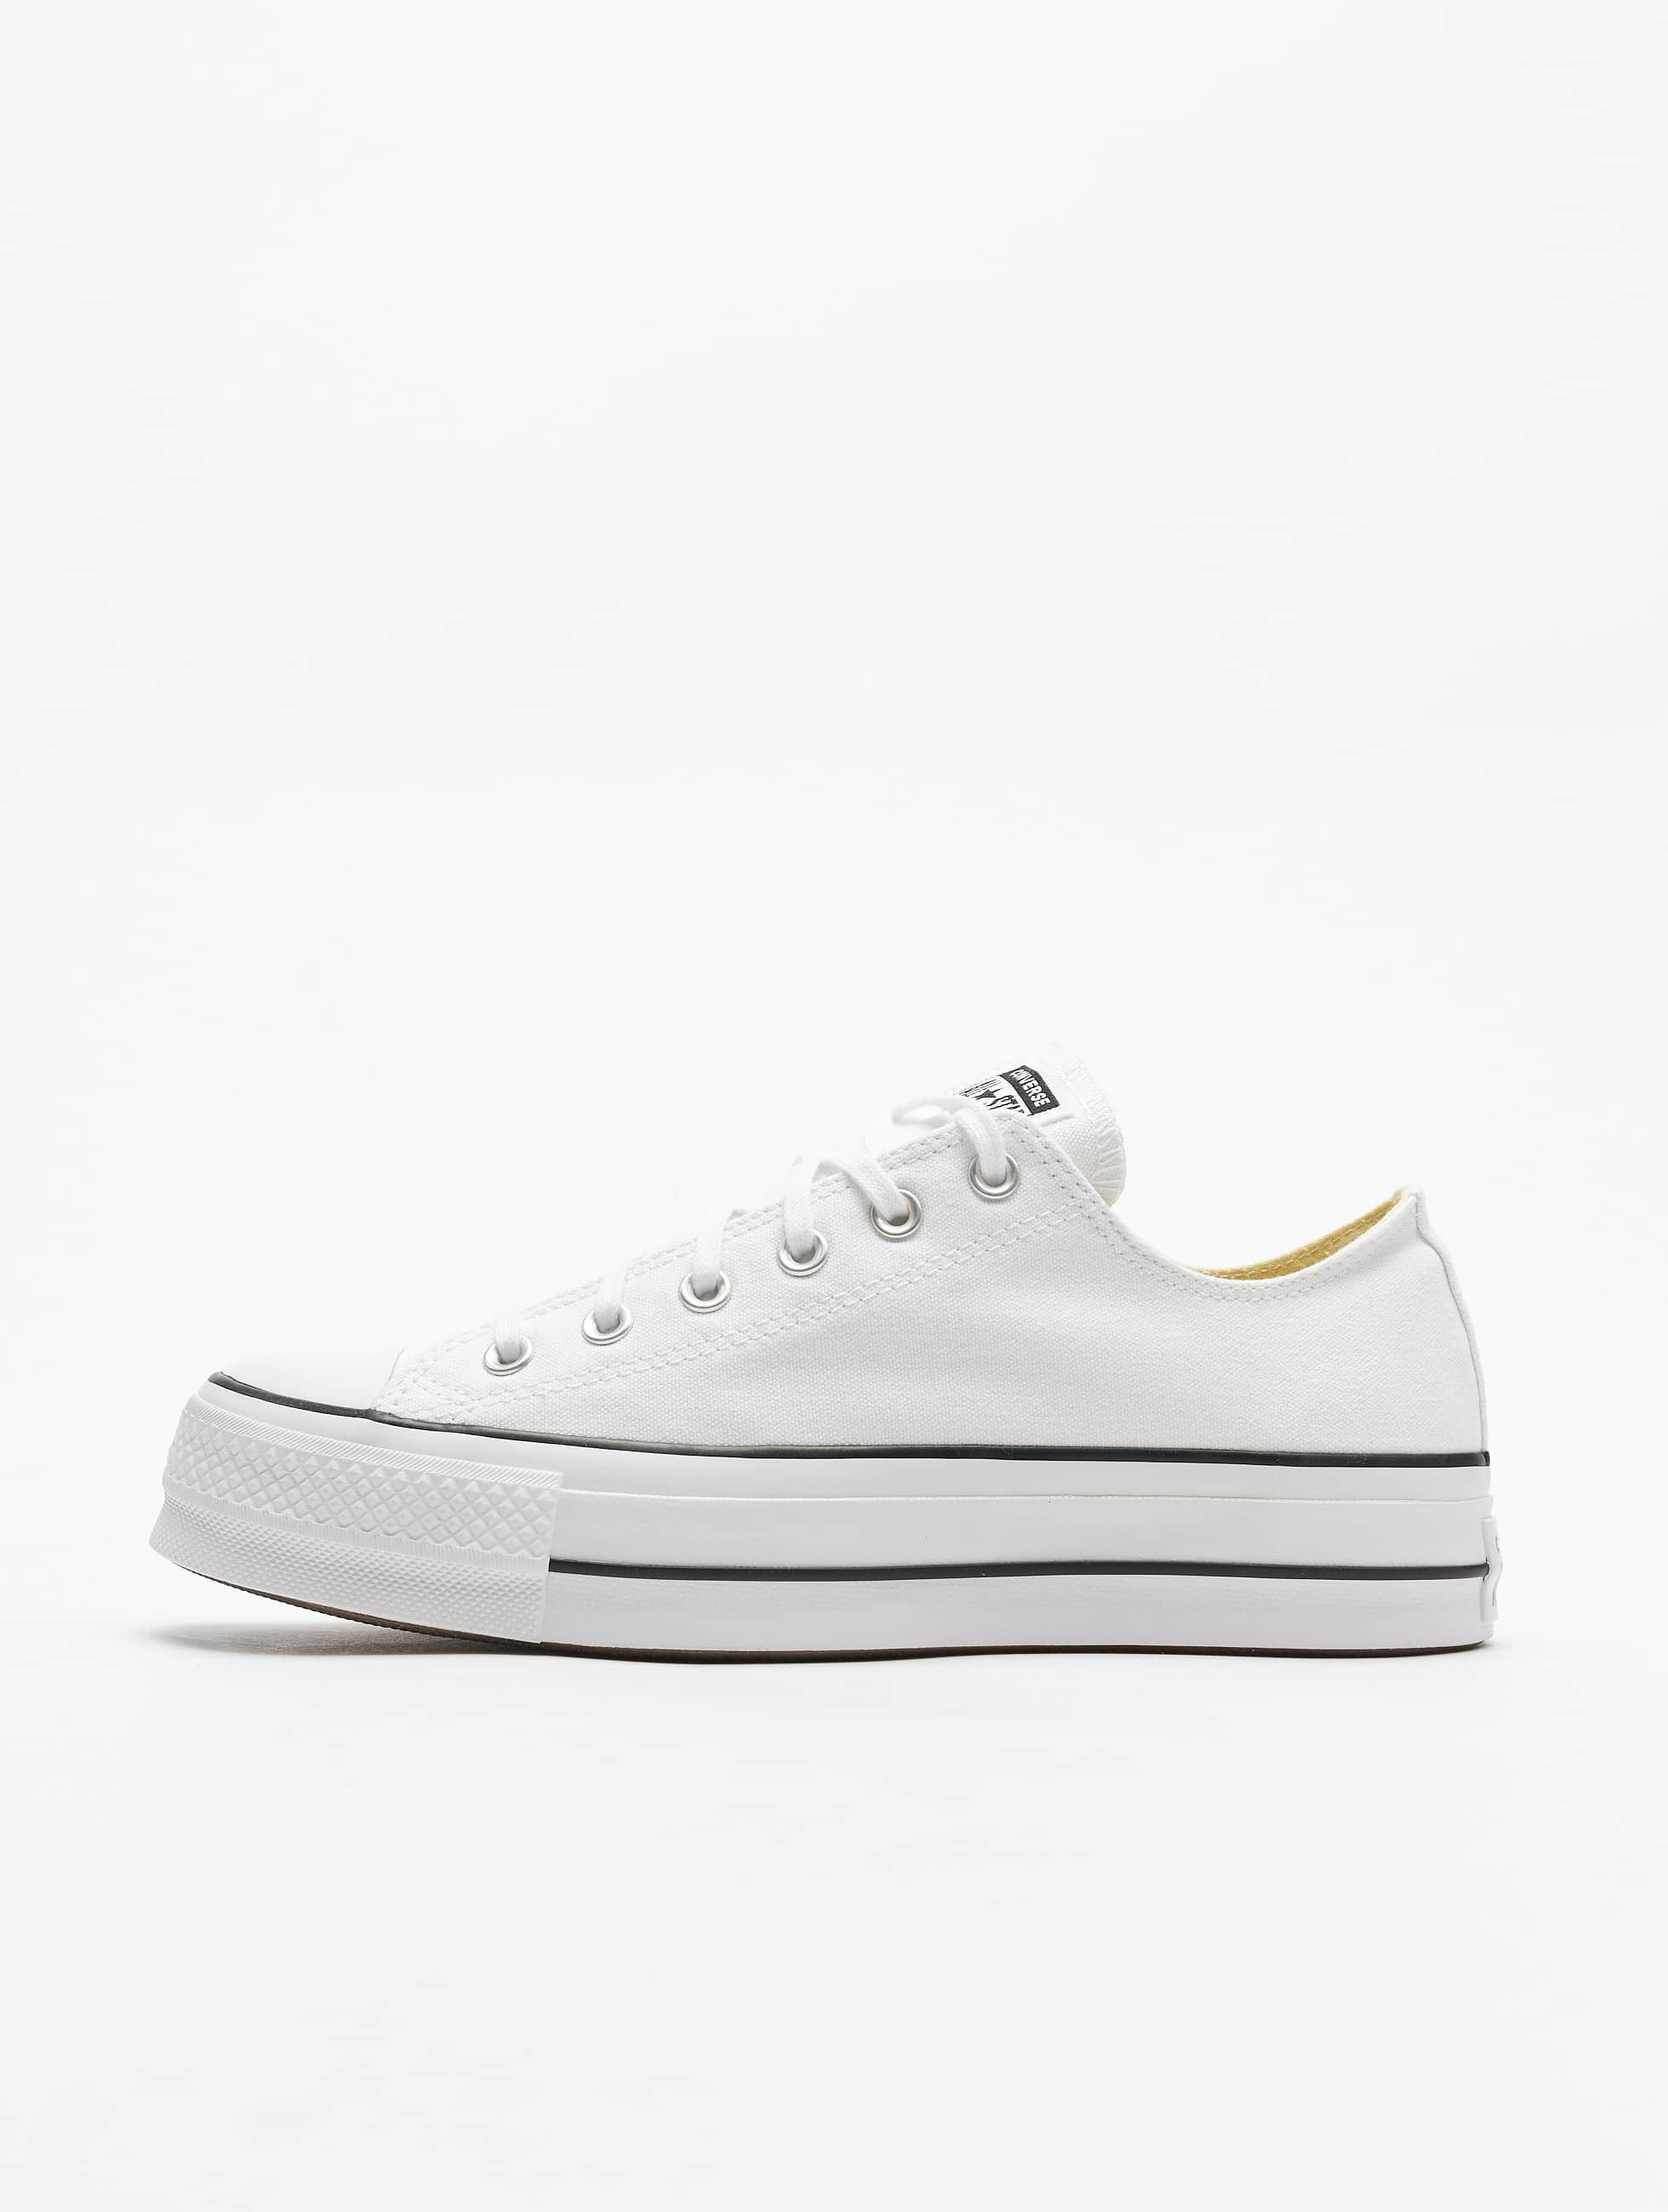 Converse Shoe / Sneakers Chuck Taylor All Star Lift OX in white 441894